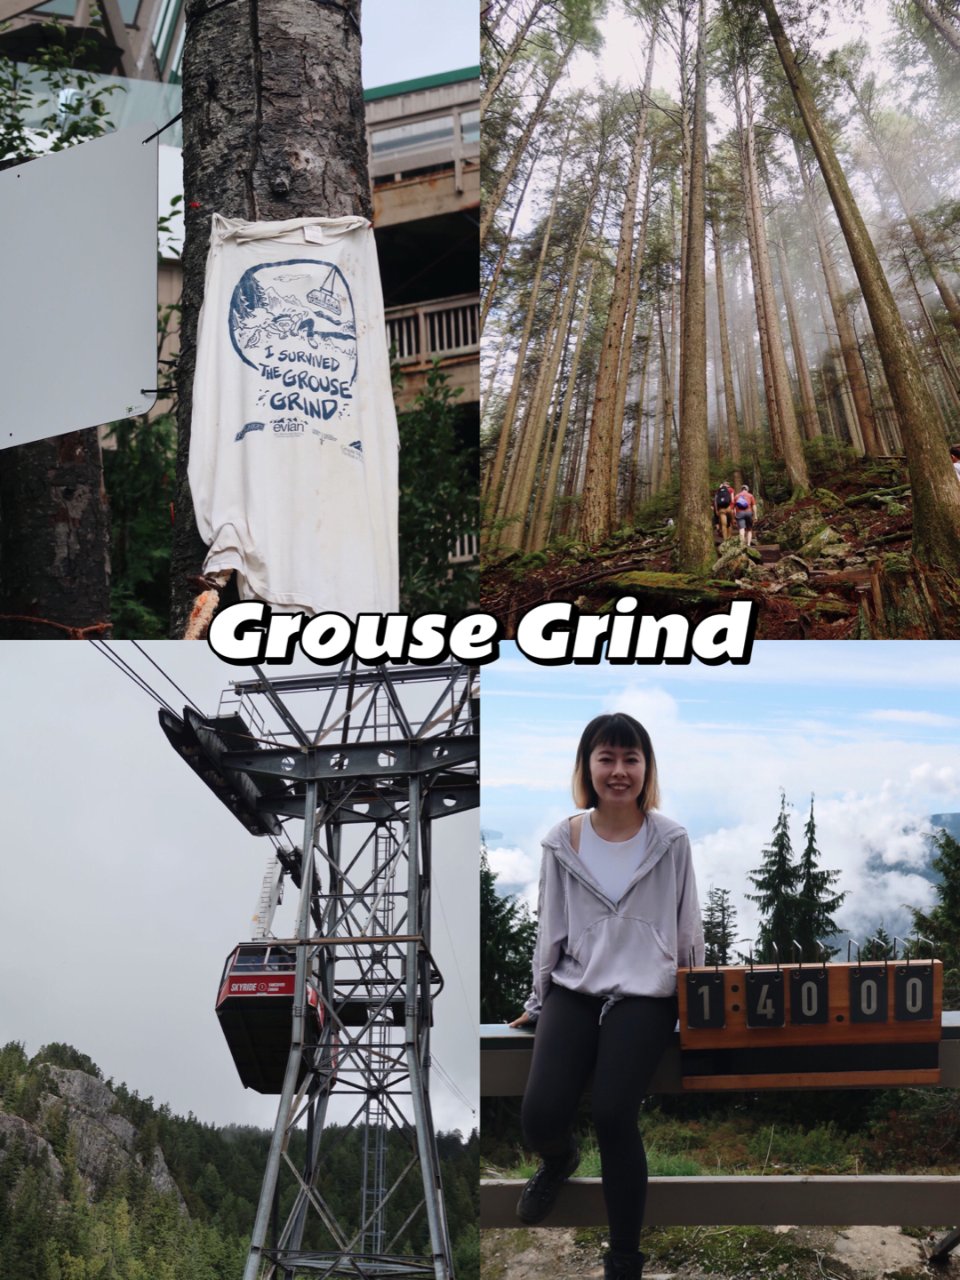 grousegrind